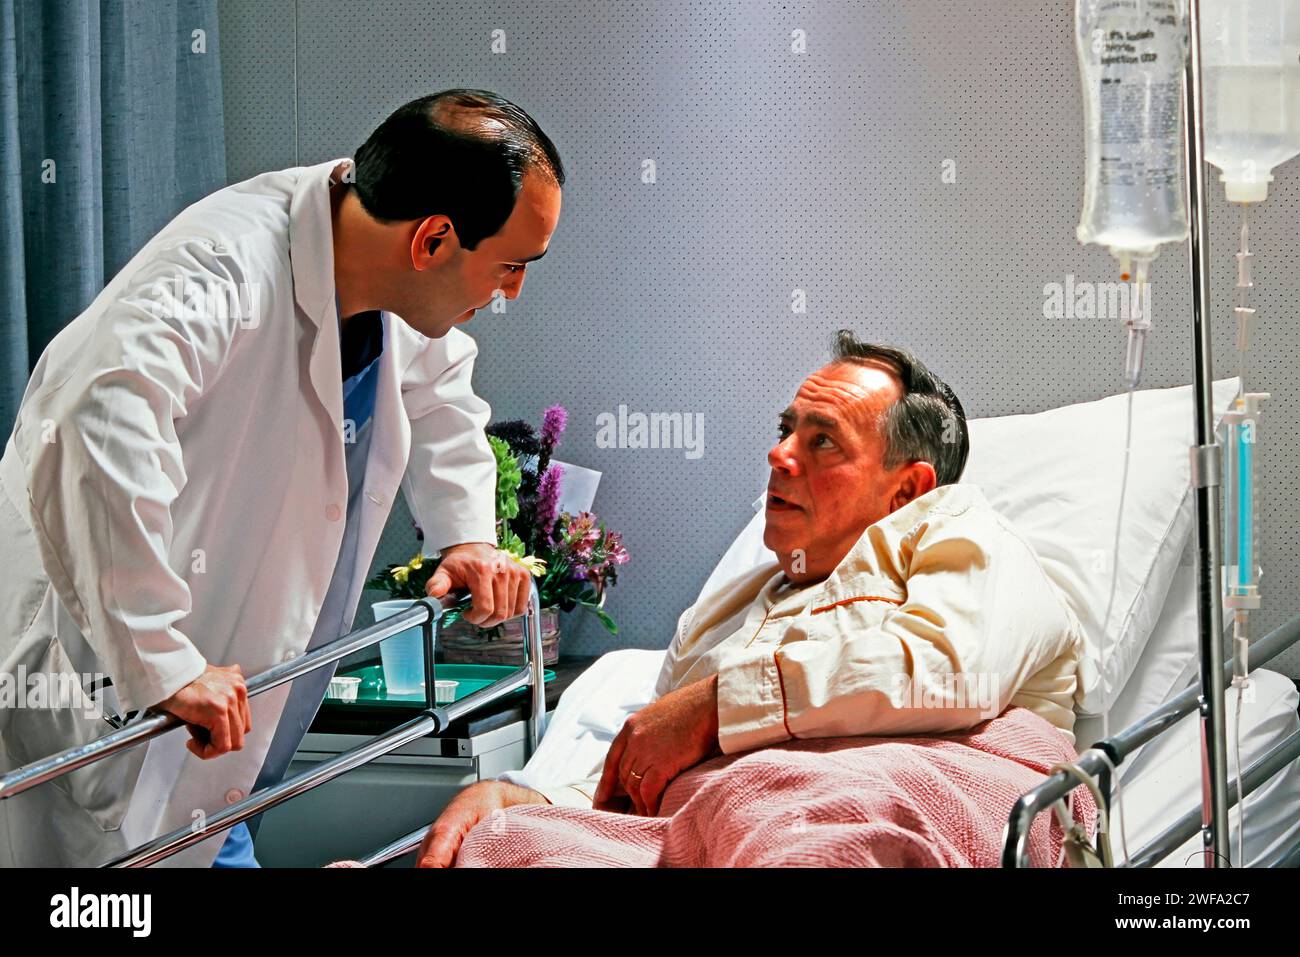 A man in a hospital bed engaged in conversation with a medical professional wearing a white coat. Stock Photo